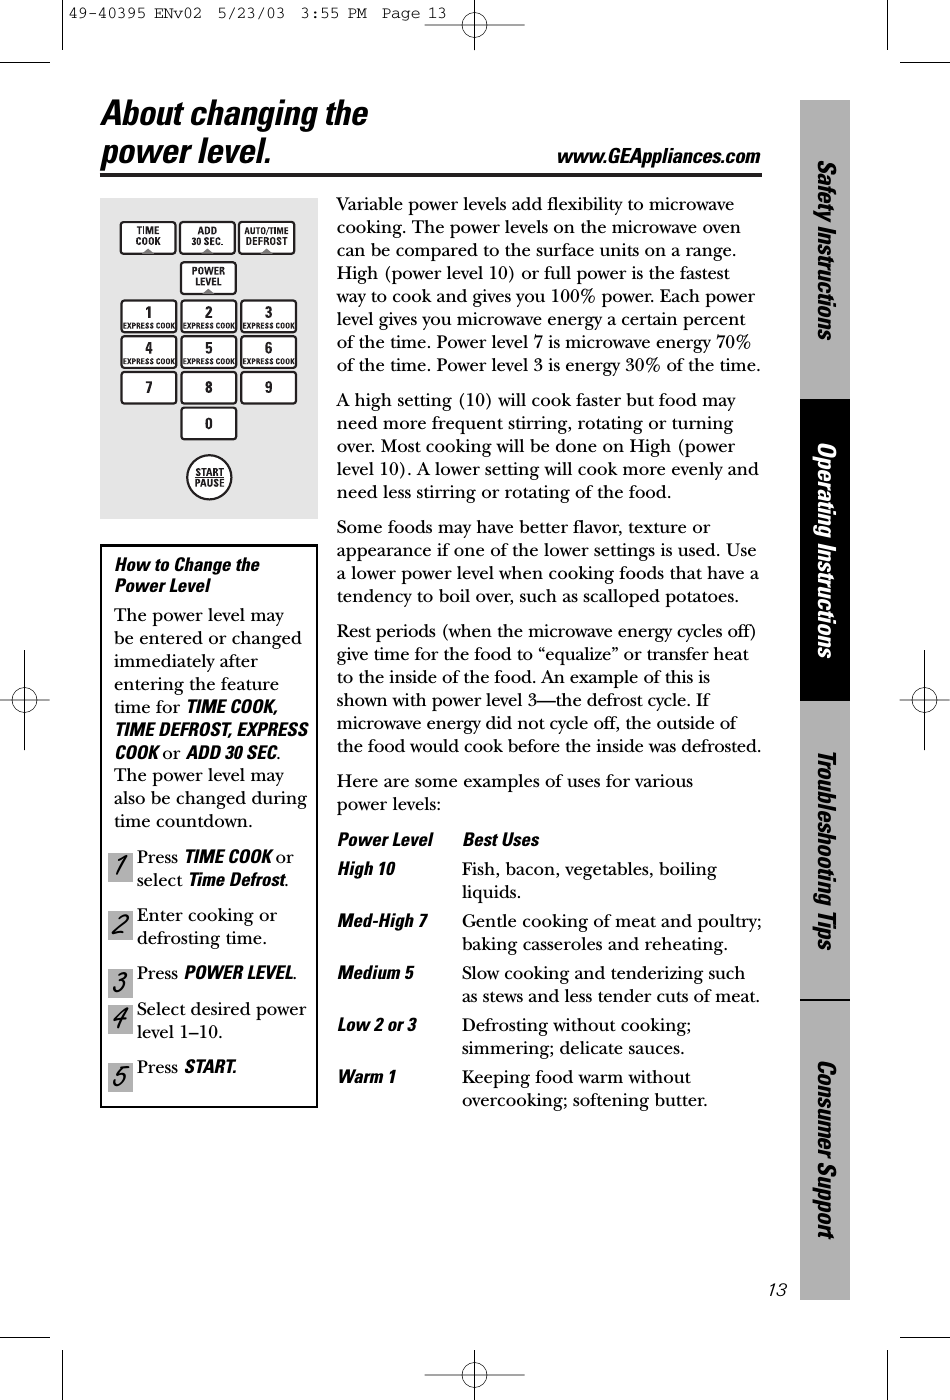 Consumer SupportTroubleshooting TipsOperating InstructionsSafety InstructionsAbout changing the power level. www.GEAppliances.com13Variable power levels add flexibility to microwavecooking. The power levels on the microwave ovencan be compared to the surface units on a range.High (power level 10) or full power is the fastestway to cook and gives you 100% power. Each powerlevel gives you microwave energy a certain percentof the time. Power level 7 is microwave energy 70%of the time. Power level 3 is energy 30% of the time.A high setting (10) will cook faster but food mayneed more frequent stirring, rotating or turningover. Most cooking will be done on High (powerlevel 10). A lower setting will cook more evenly andneed less stirring or rotating of the food. Some foods may have better flavor, texture orappearance if one of the lower settings is used. Use a lower power level when cooking foods that have atendency to boil over, such as scalloped potatoes.Rest periods (when the microwave energy cycles off)give time for the food to “equalize” or transfer heatto the inside of the food. An example of this isshown with power level 3—the defrost cycle. Ifmicrowave energy did not cycle off, the outside ofthe food would cook before the inside was defrosted.Here are some examples of uses for various power levels:Power Level Best UsesHigh 10 Fish, bacon, vegetables, boilingliquids.Med-High 7 Gentle cooking of meat and poultry;baking casseroles and reheating.Medium 5 Slow cooking and tenderizing suchas stews and less tender cuts of meat.Low 2 or 3  Defrosting without cooking;simmering; delicate sauces.Warm 1 Keeping food warm withoutovercooking; softening butter.How to Change the Power Level The power level may be entered or changedimmediately afterentering the featuretime for TIME COOK,TIME DEFROST, EXPRESSCOOK or ADD 30 SEC.The power level mayalso be changed duringtime countdown.Press TIME COOK orselect Time Defrost.Enter cooking ordefrosting time.Press POWER LEVEL.Select desired powerlevel 1–10.Press START.5432149-40395 ENv02  5/23/03  3:55 PM  Page 13